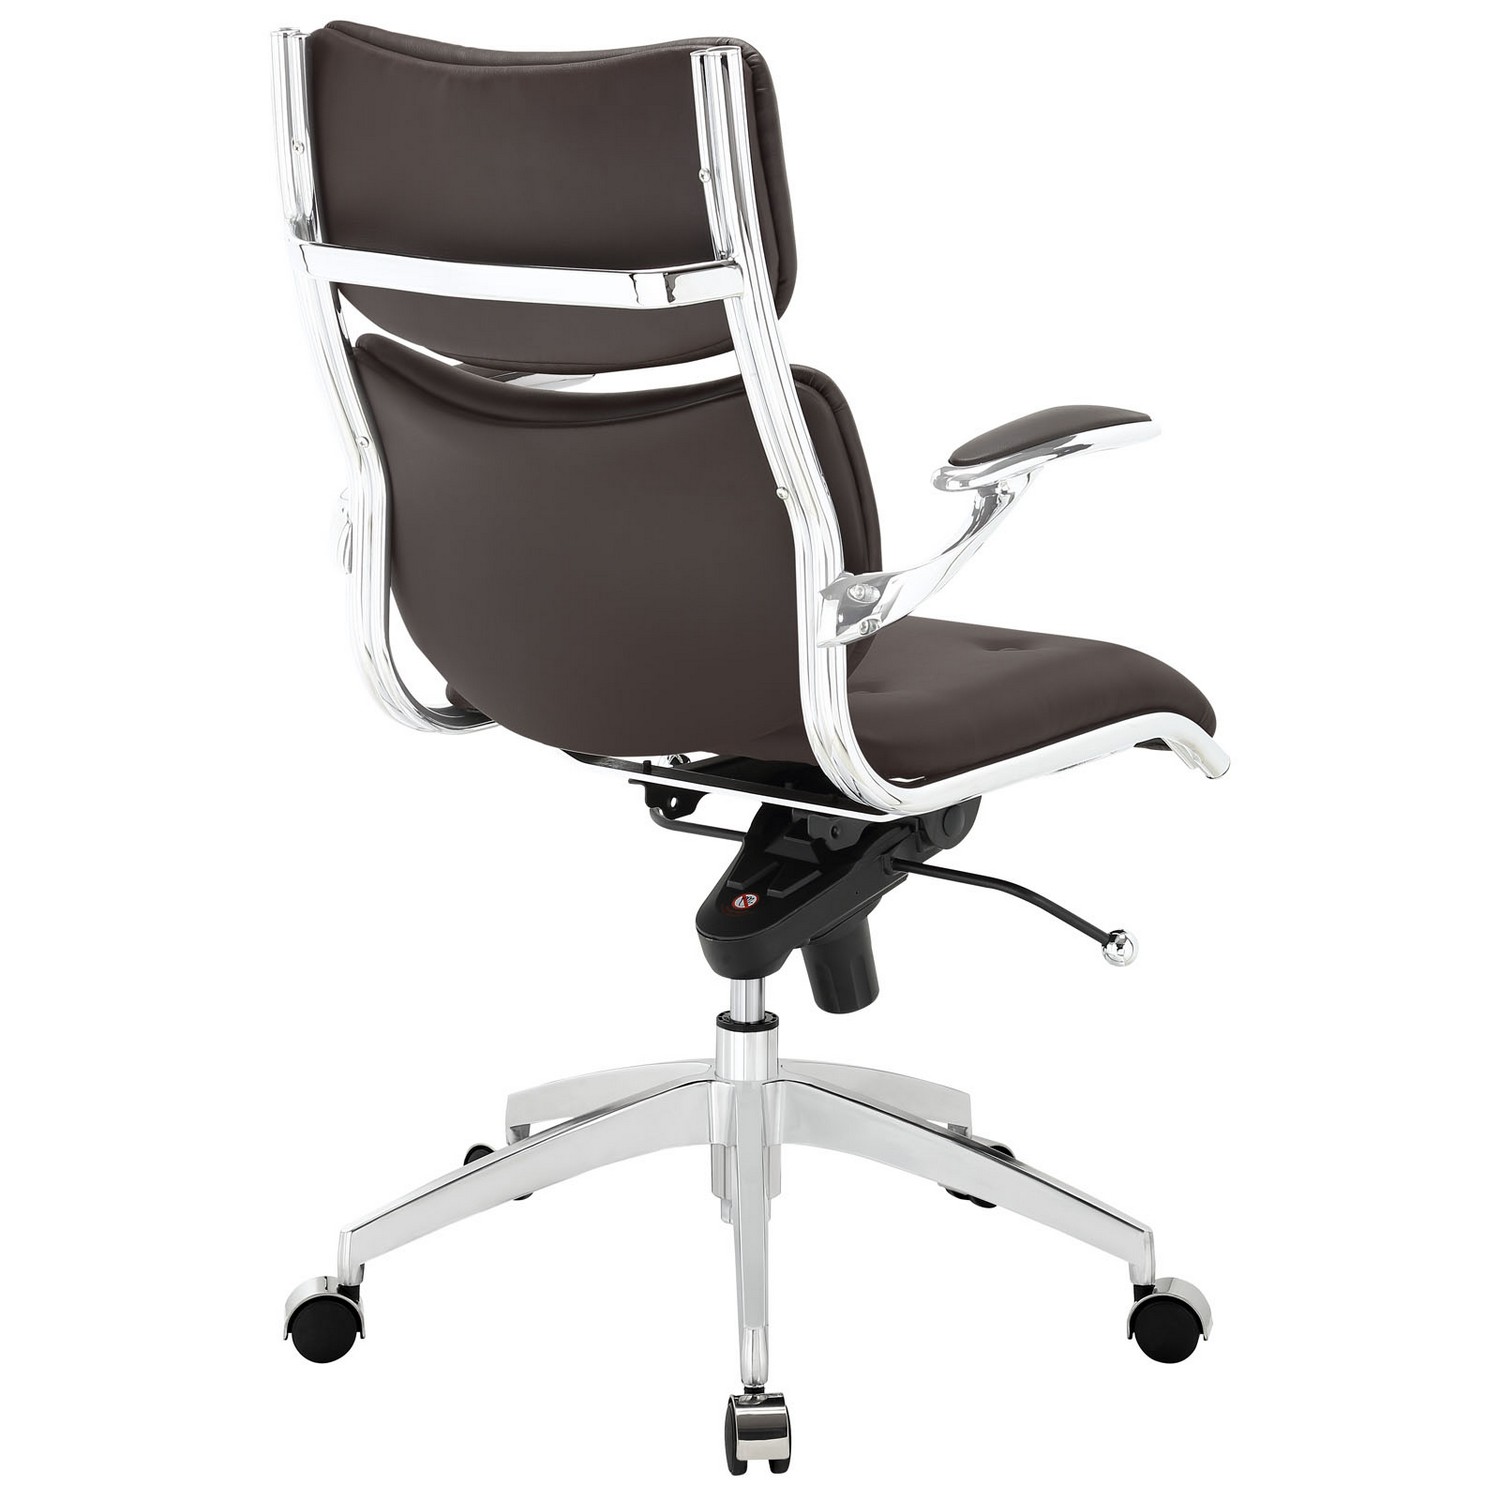 Modway Push Mid Back Office Chair - Brown